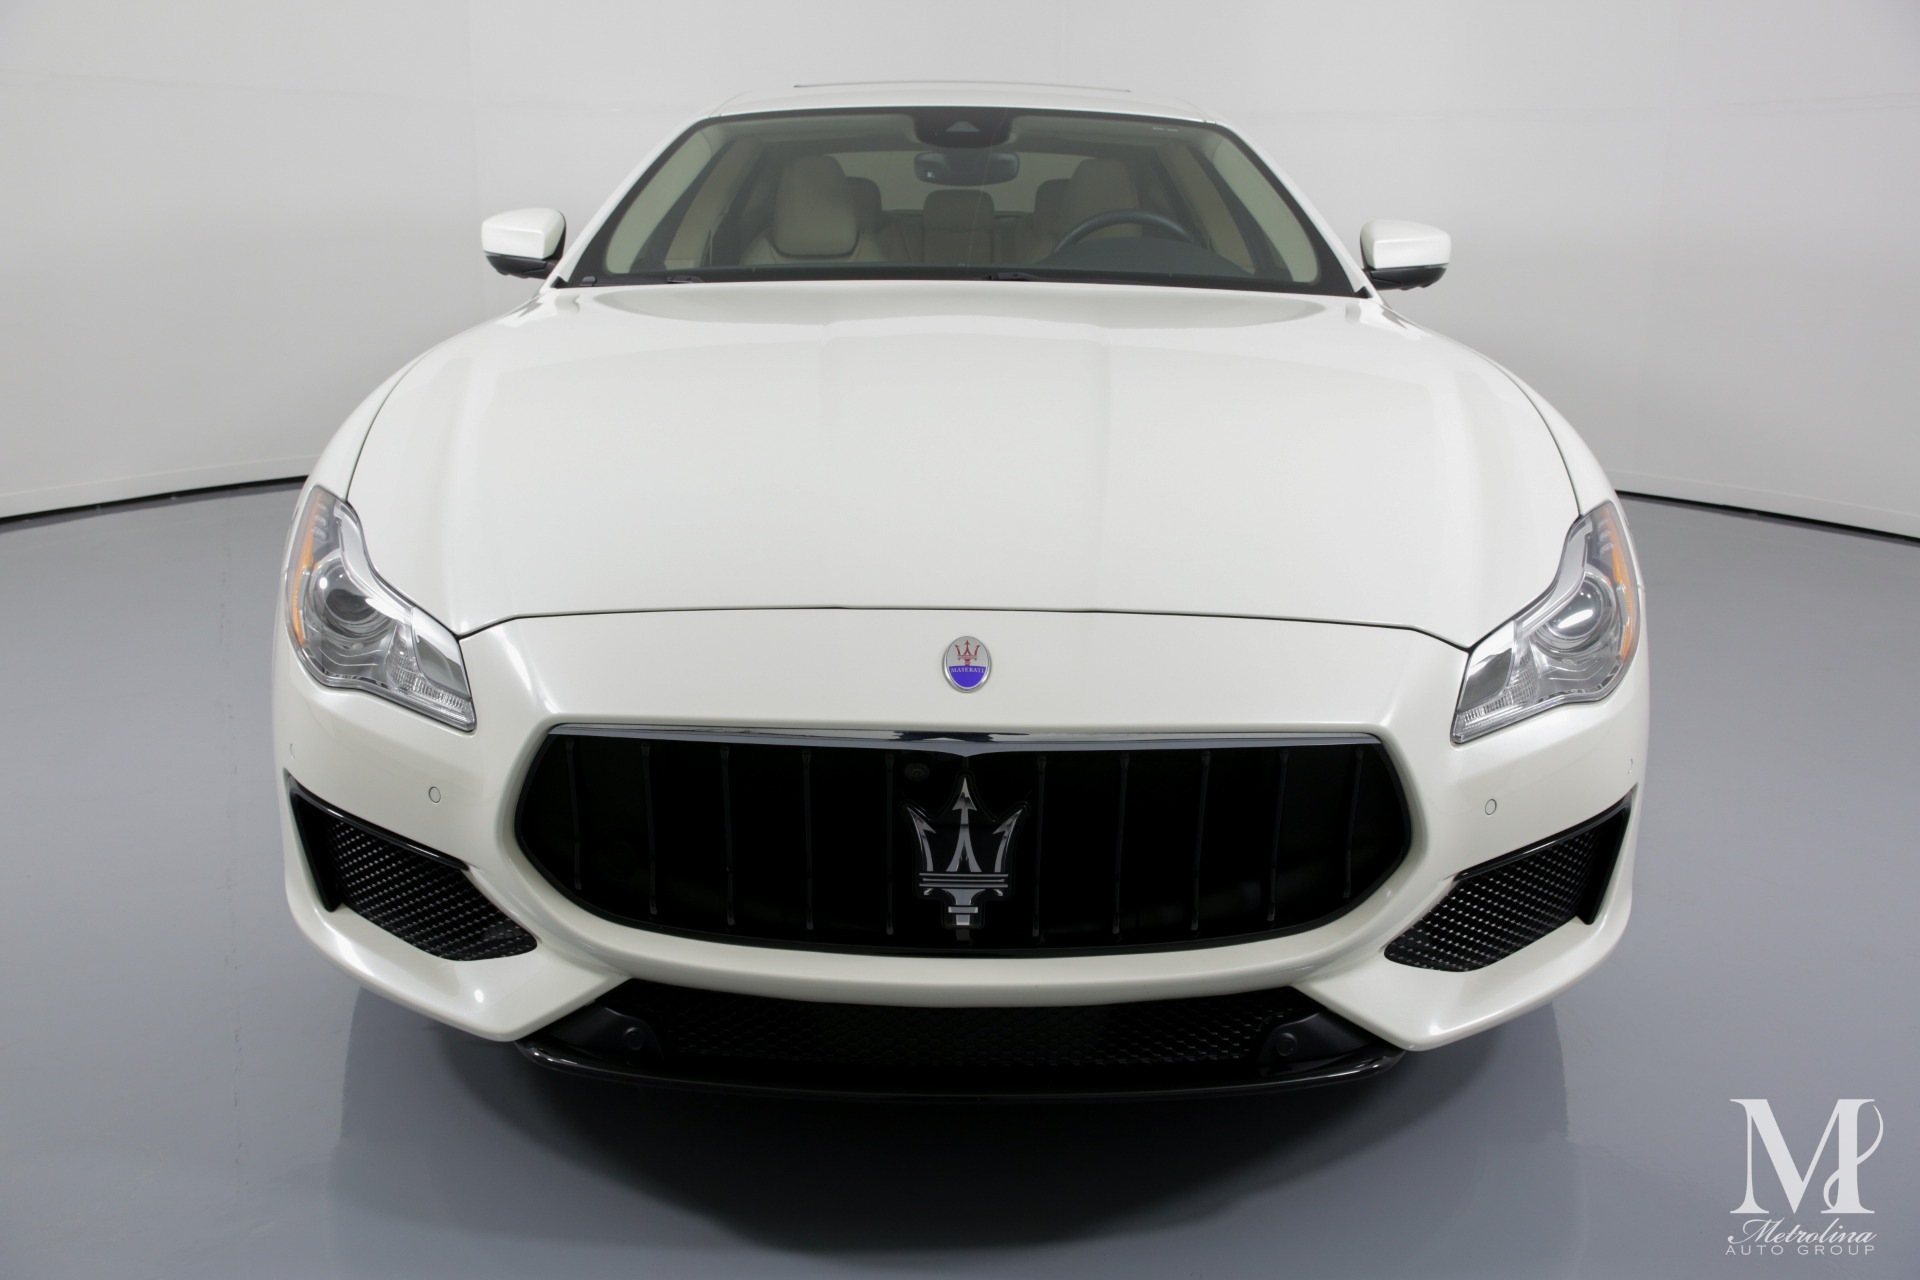 Used 2017 Maserati Quattroporte S GranSport for sale Sold at Metrolina Auto Group in Charlotte NC 28217 - 3